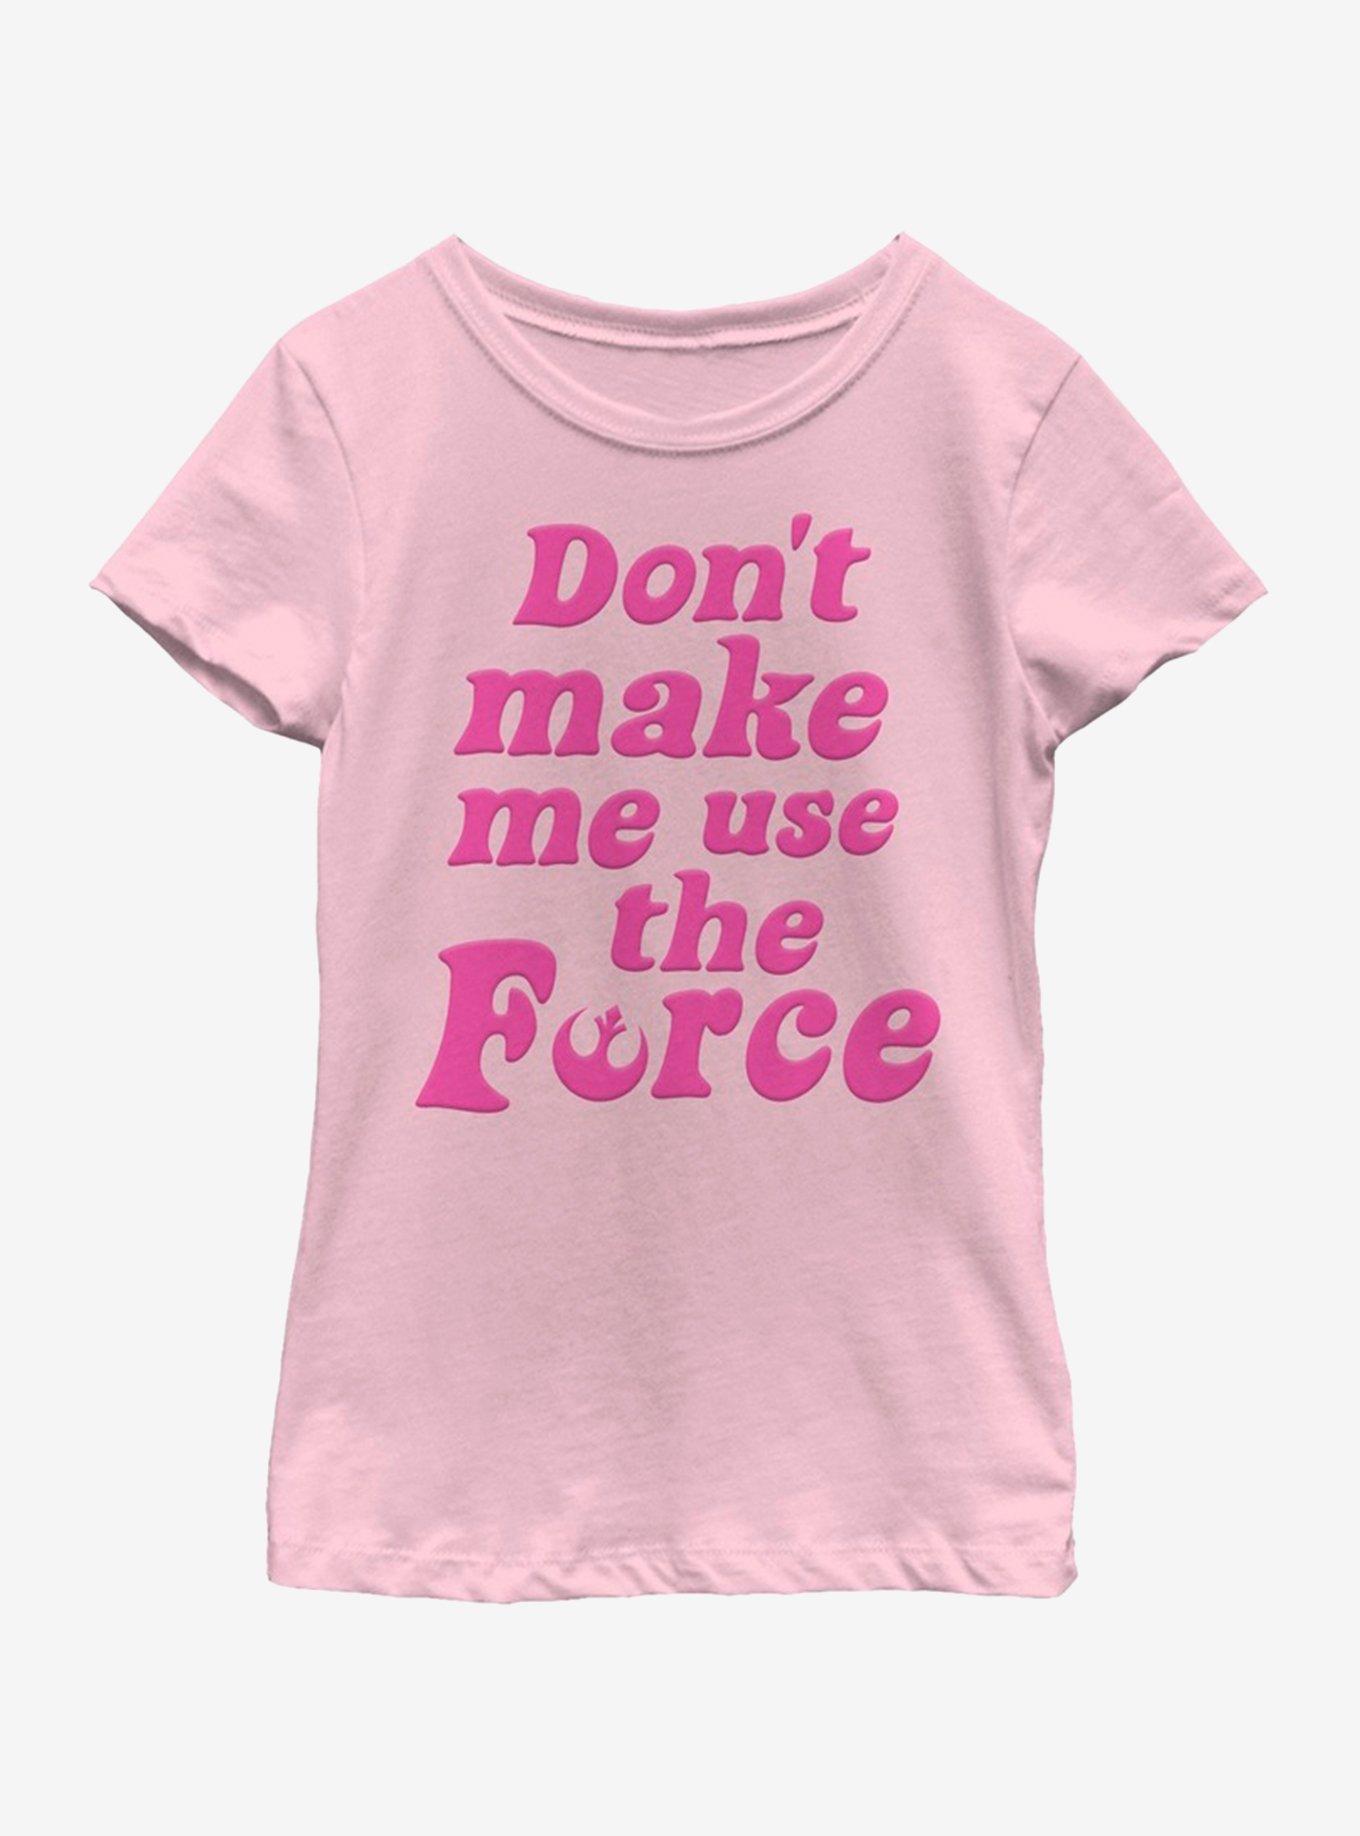 Star Wars Girls Can Do Anything Youth Girls T-Shirt, PINK, hi-res